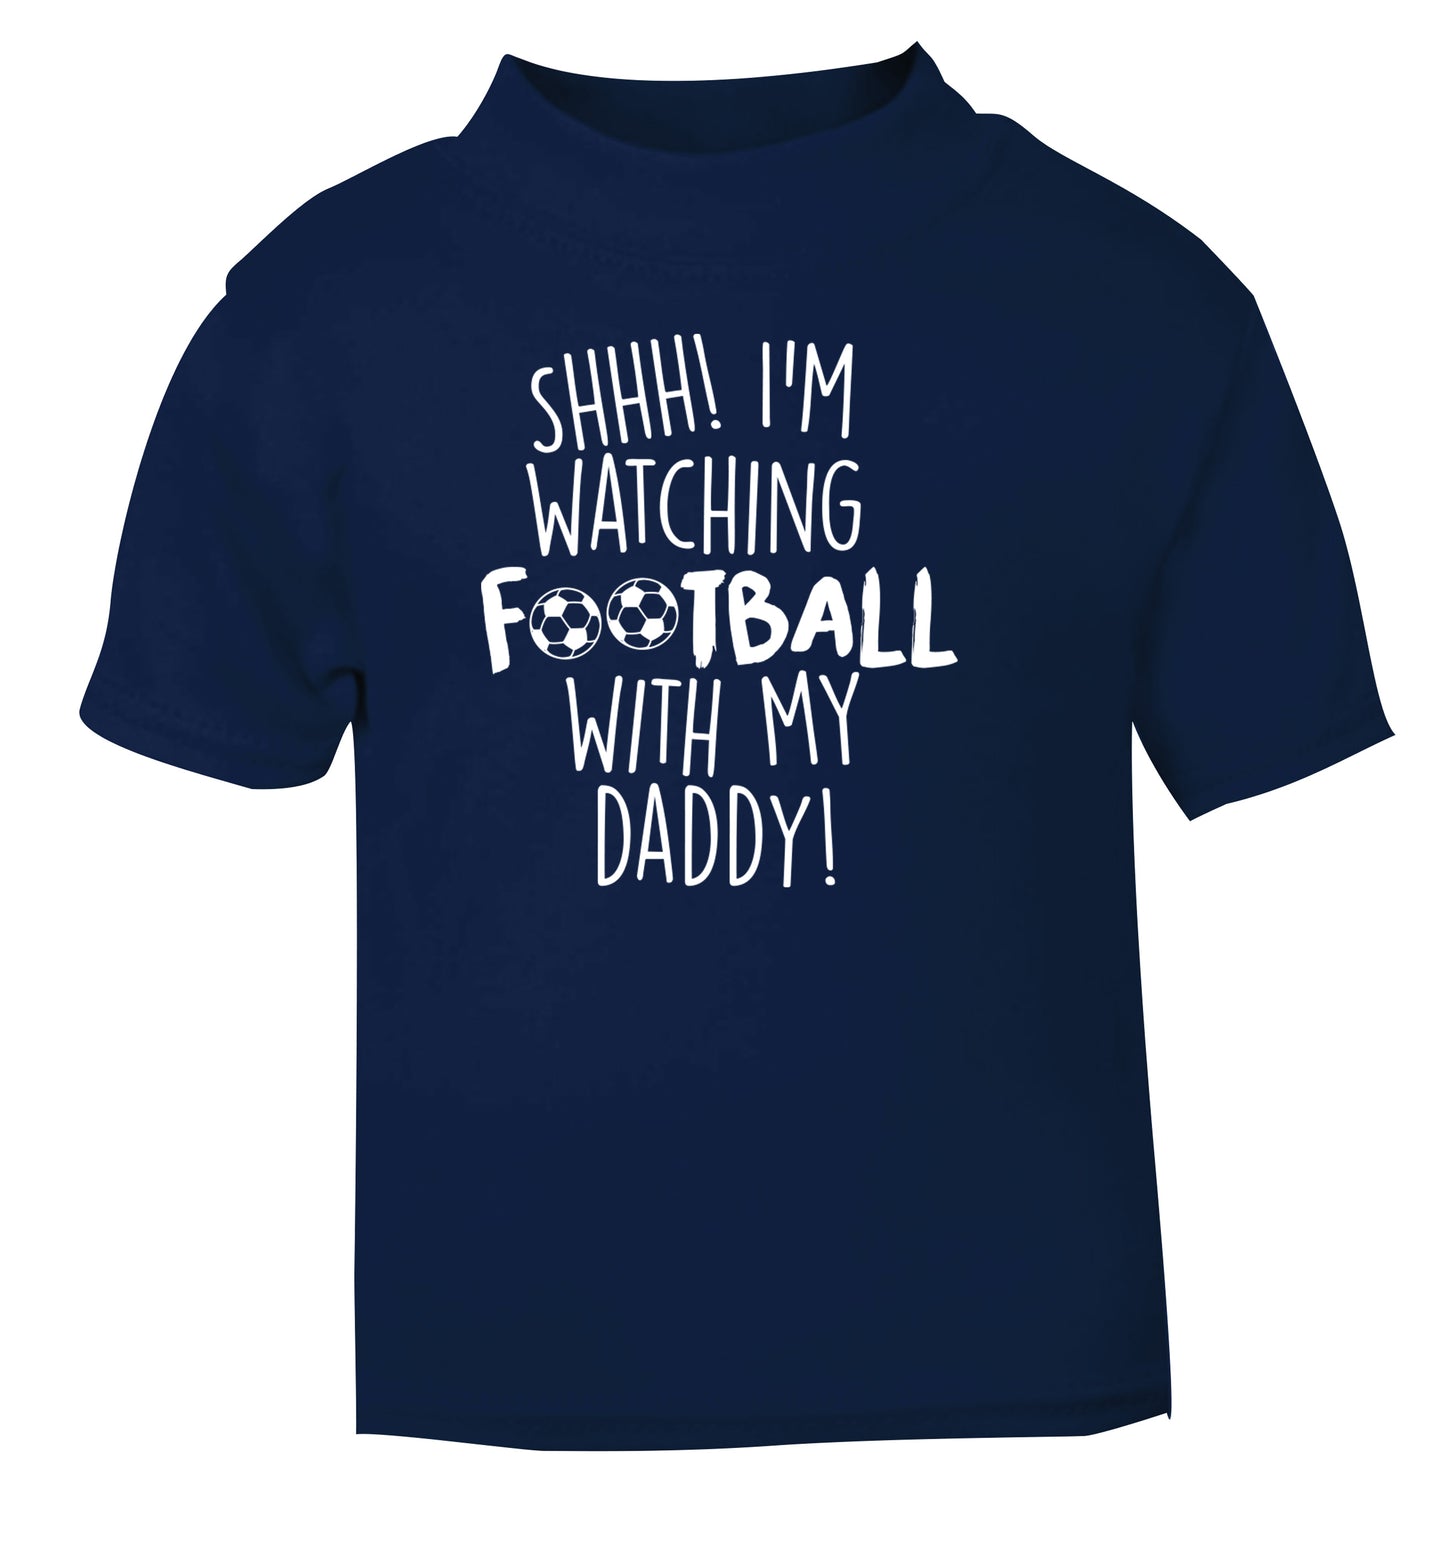 Shhh I'm watching football with my daddy navy Baby Toddler Tshirt 2 Years